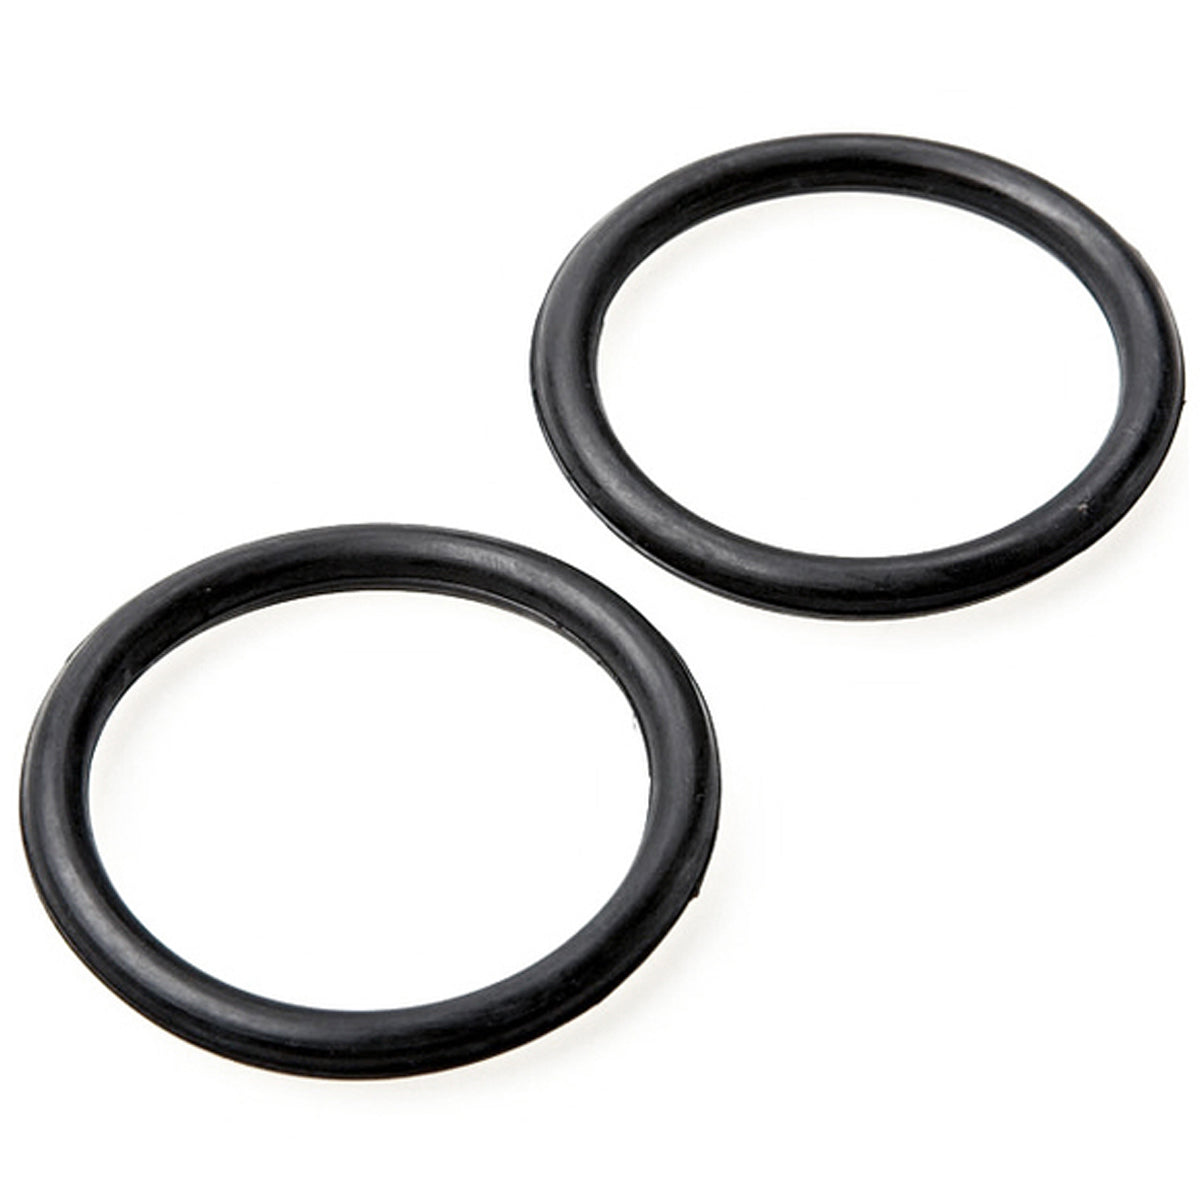 HDR Replacement Rubber Stirrup Rings